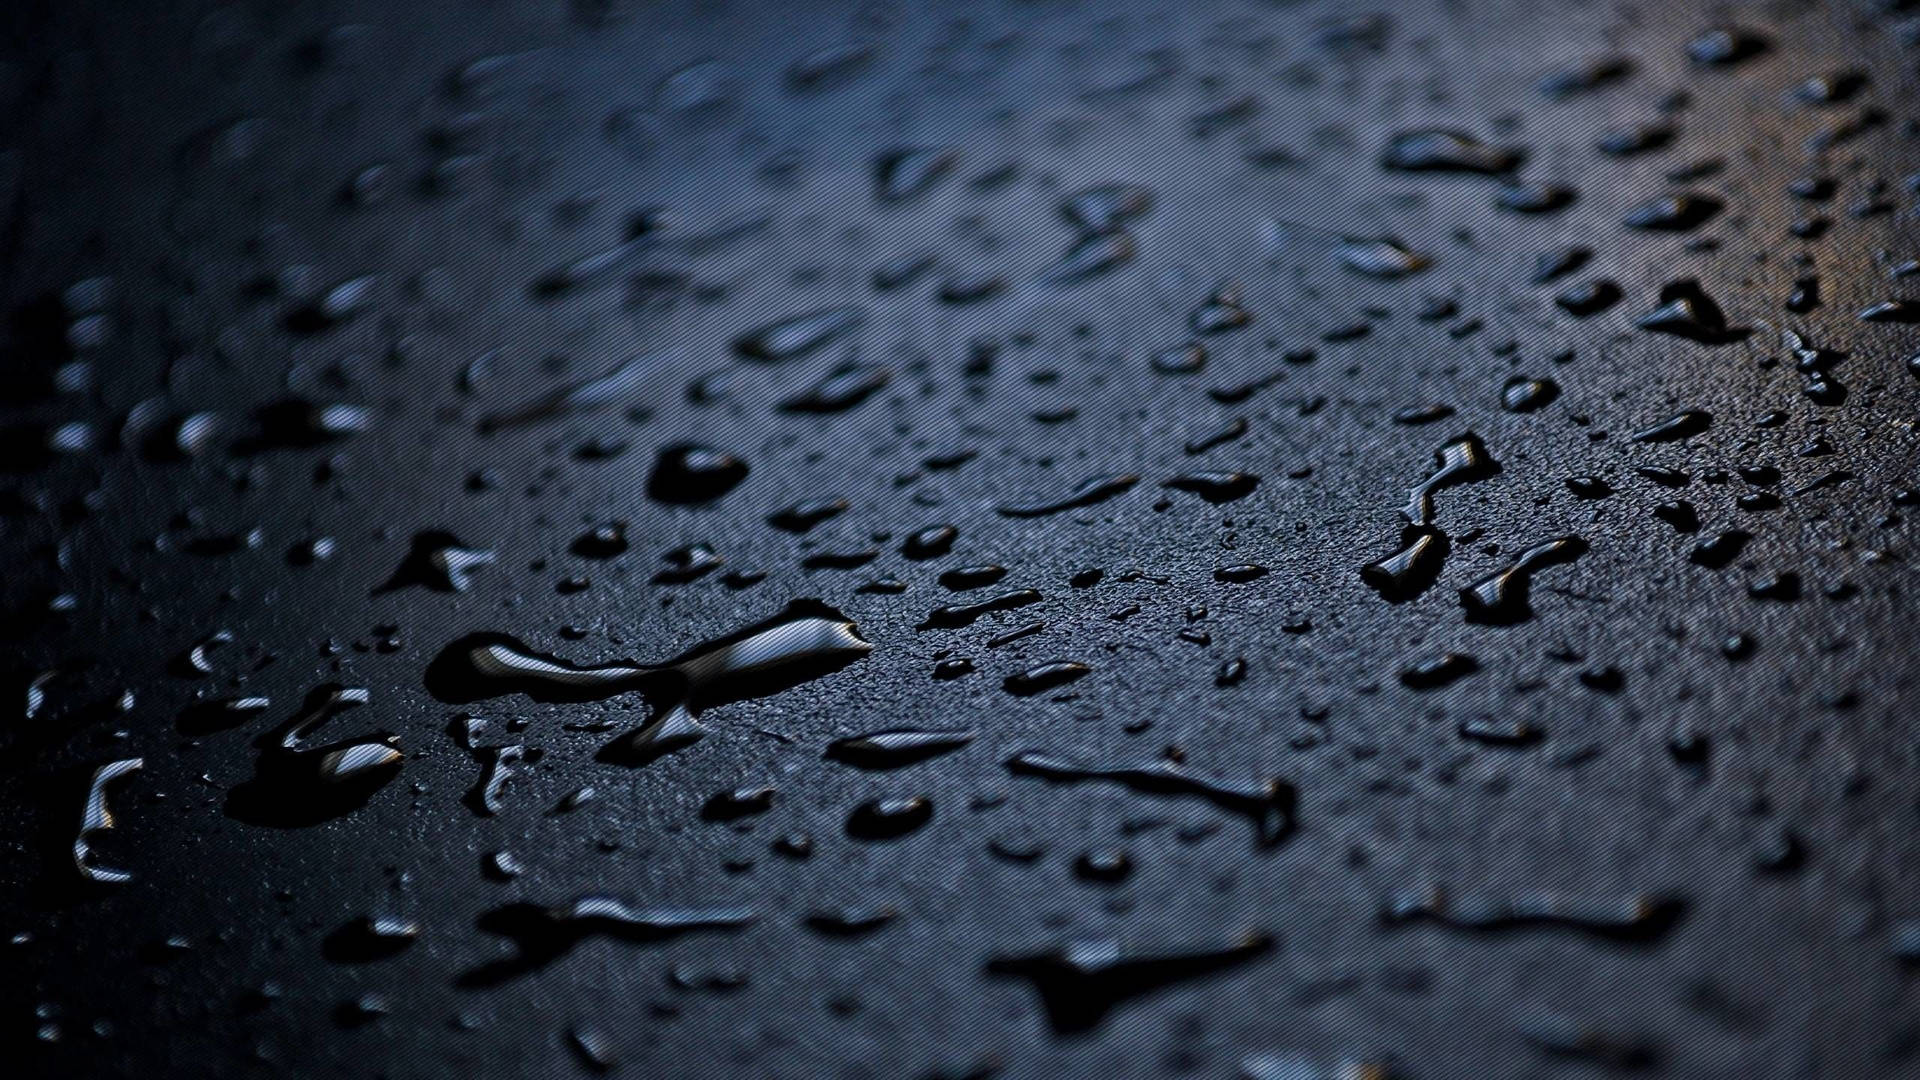 Raindrops And Water Splashes On A Black Surface Wallpaper